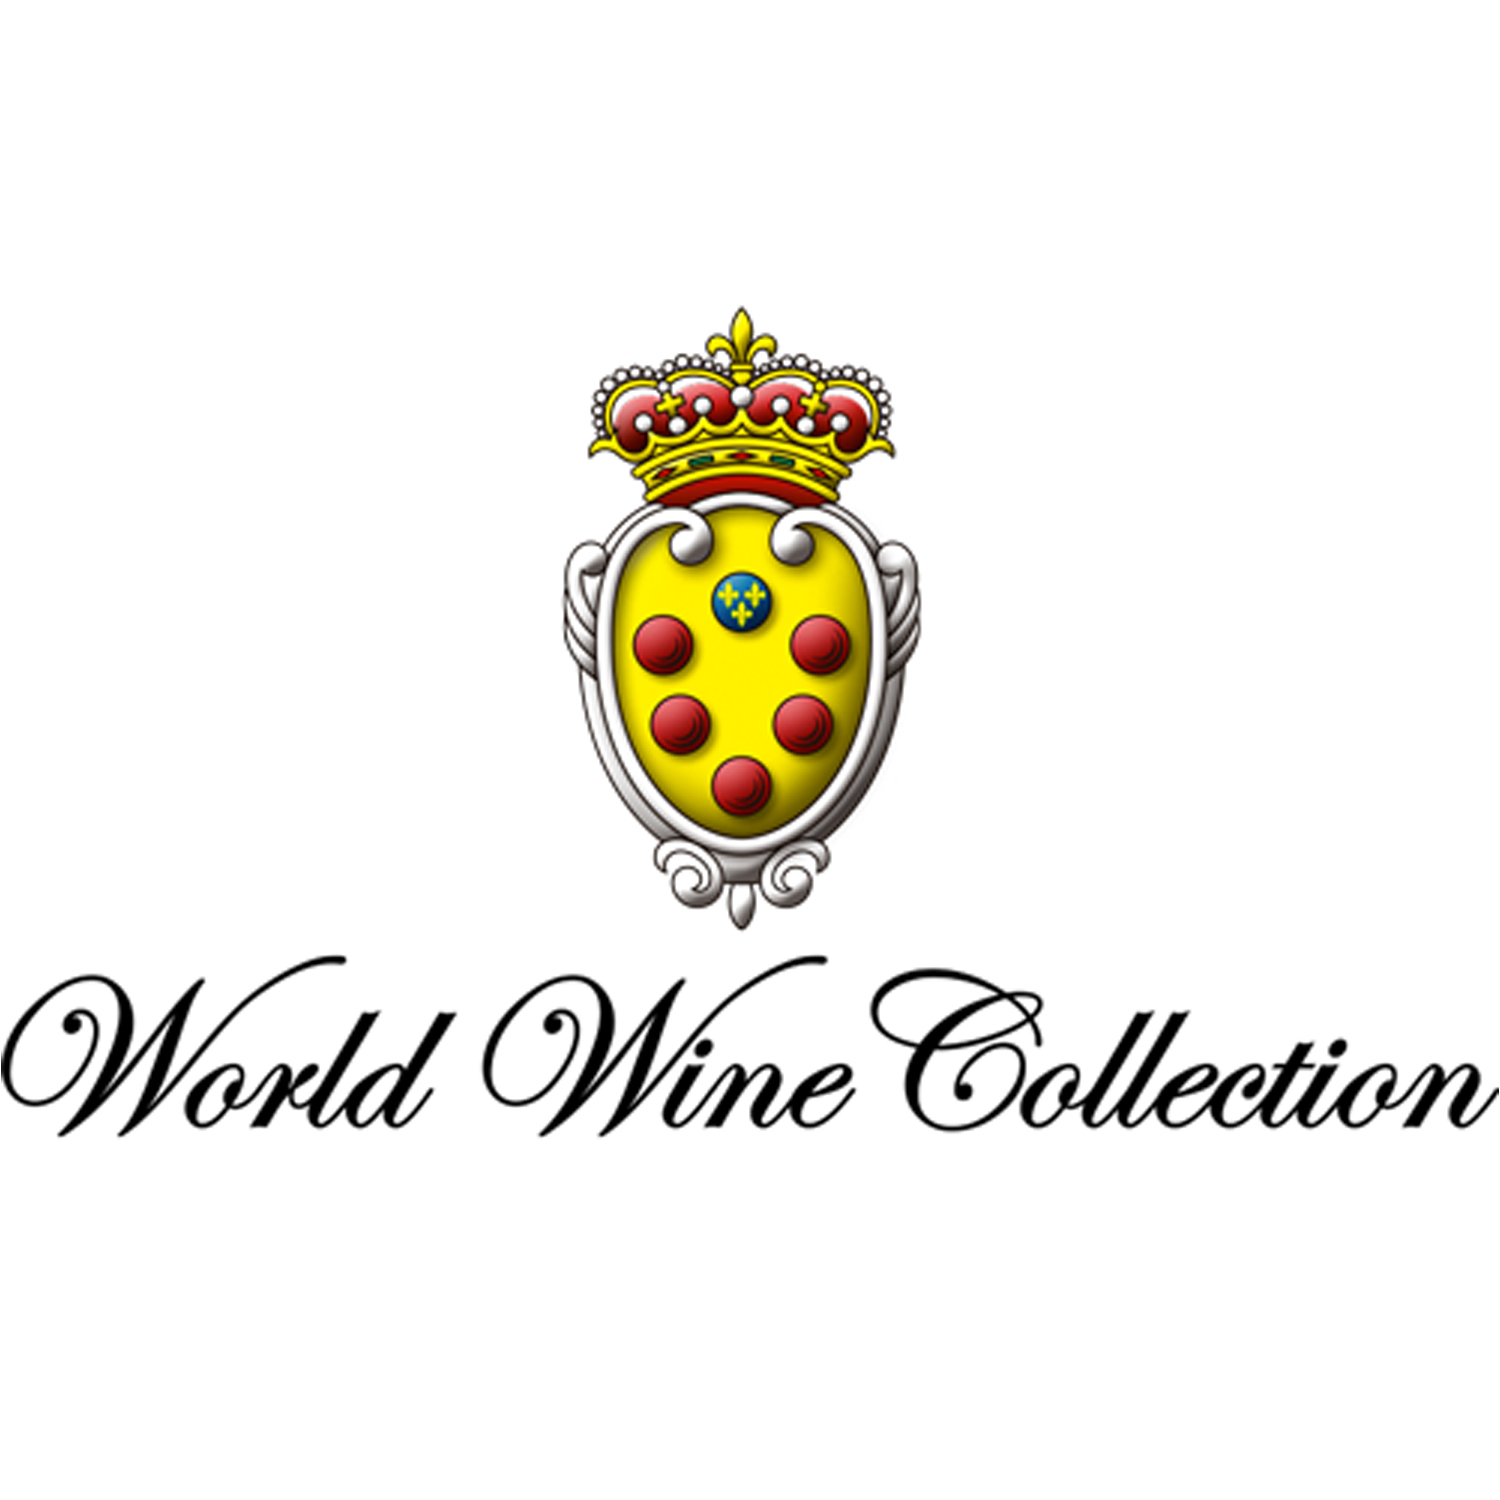 World Wine Collection